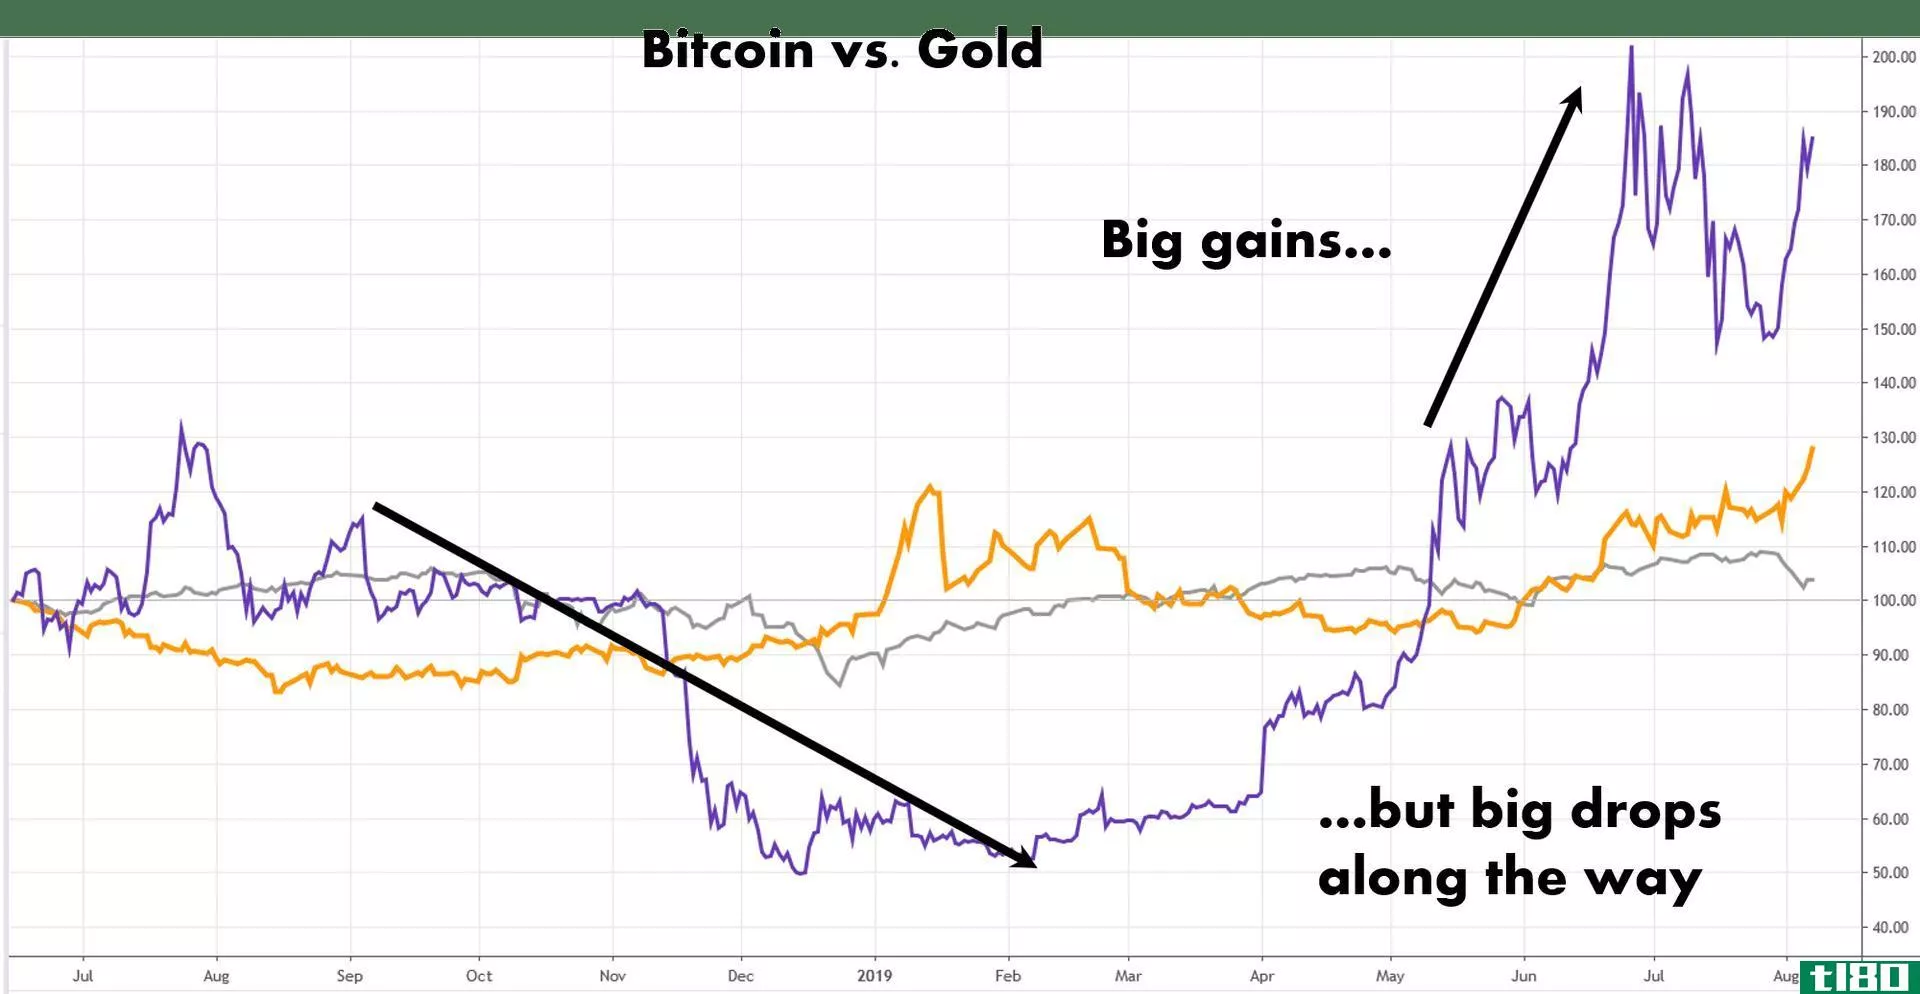 Chart showing the performance of bitcoin vs. gold